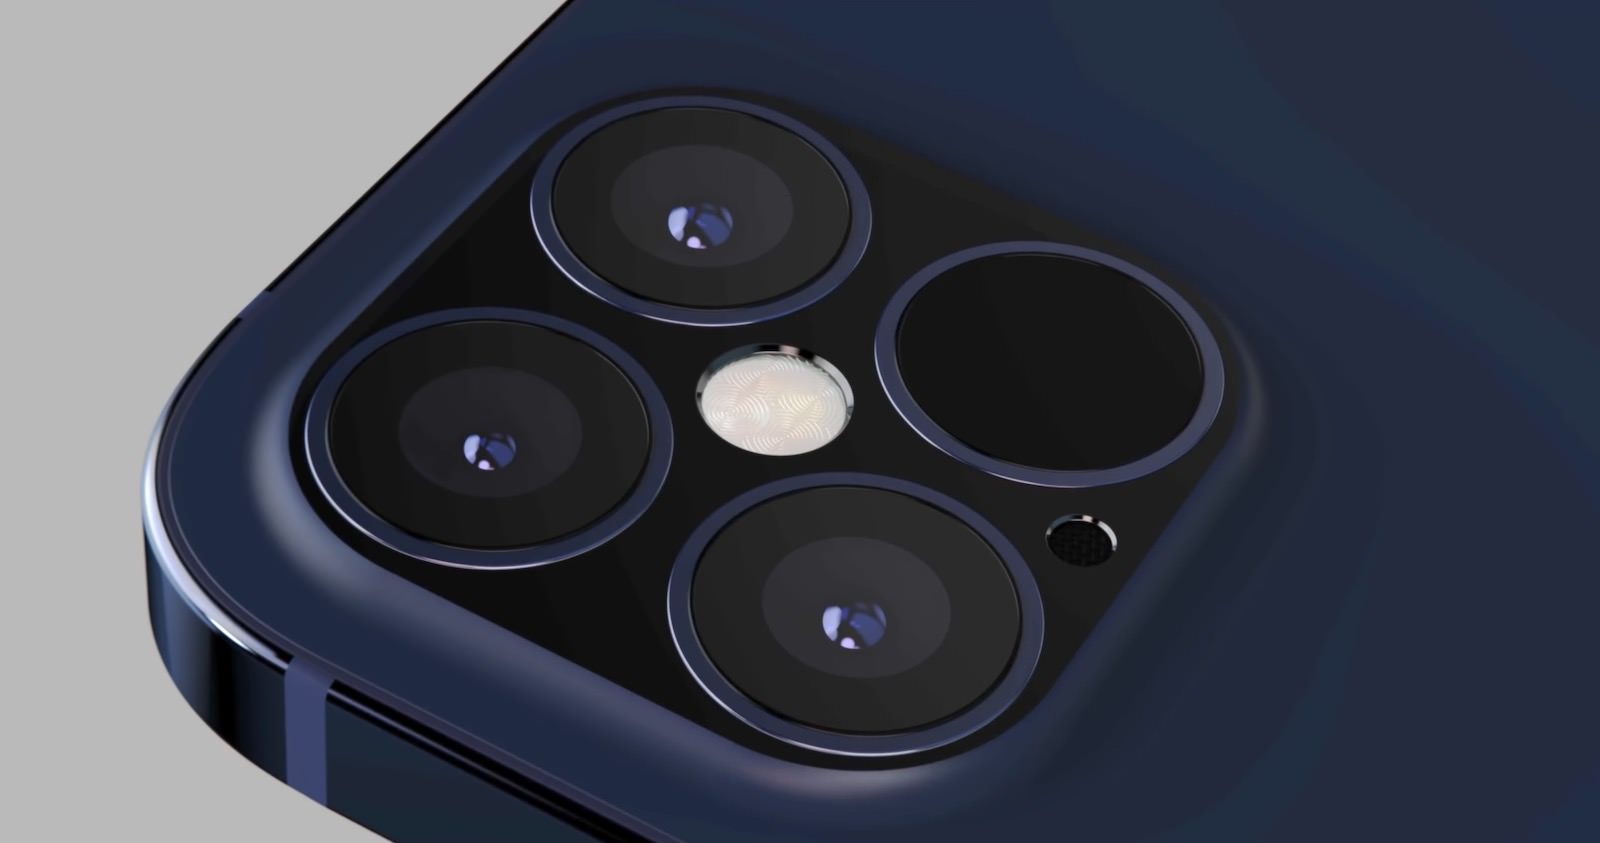 iPhone 12 Pro Navy Blue Concept image